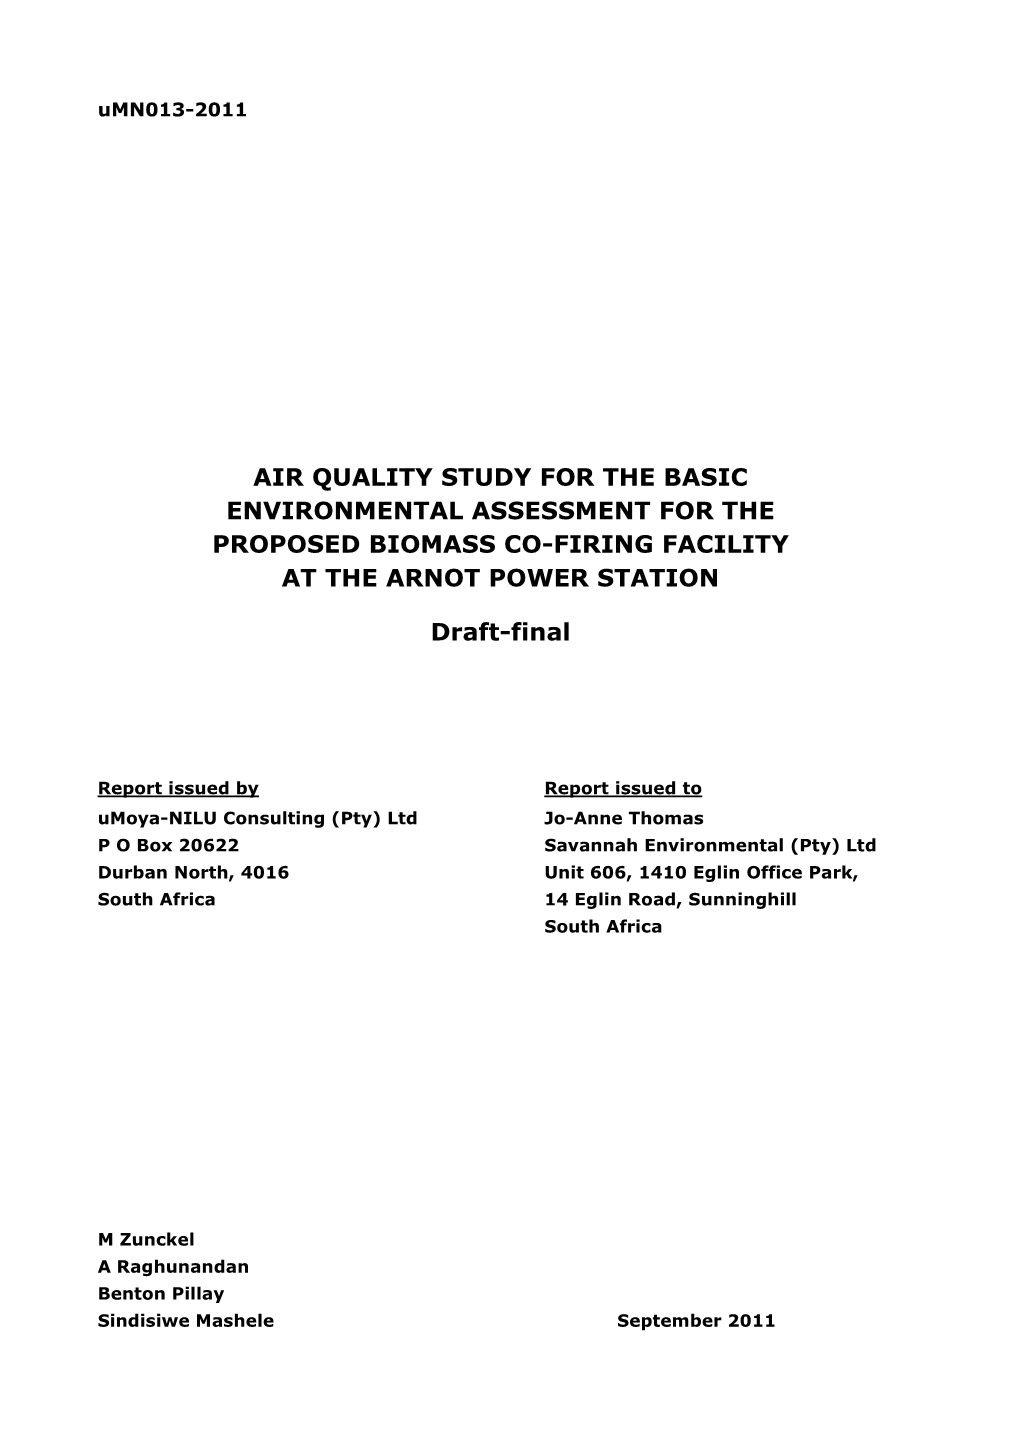 Air Quality Study for the Basic Environmental